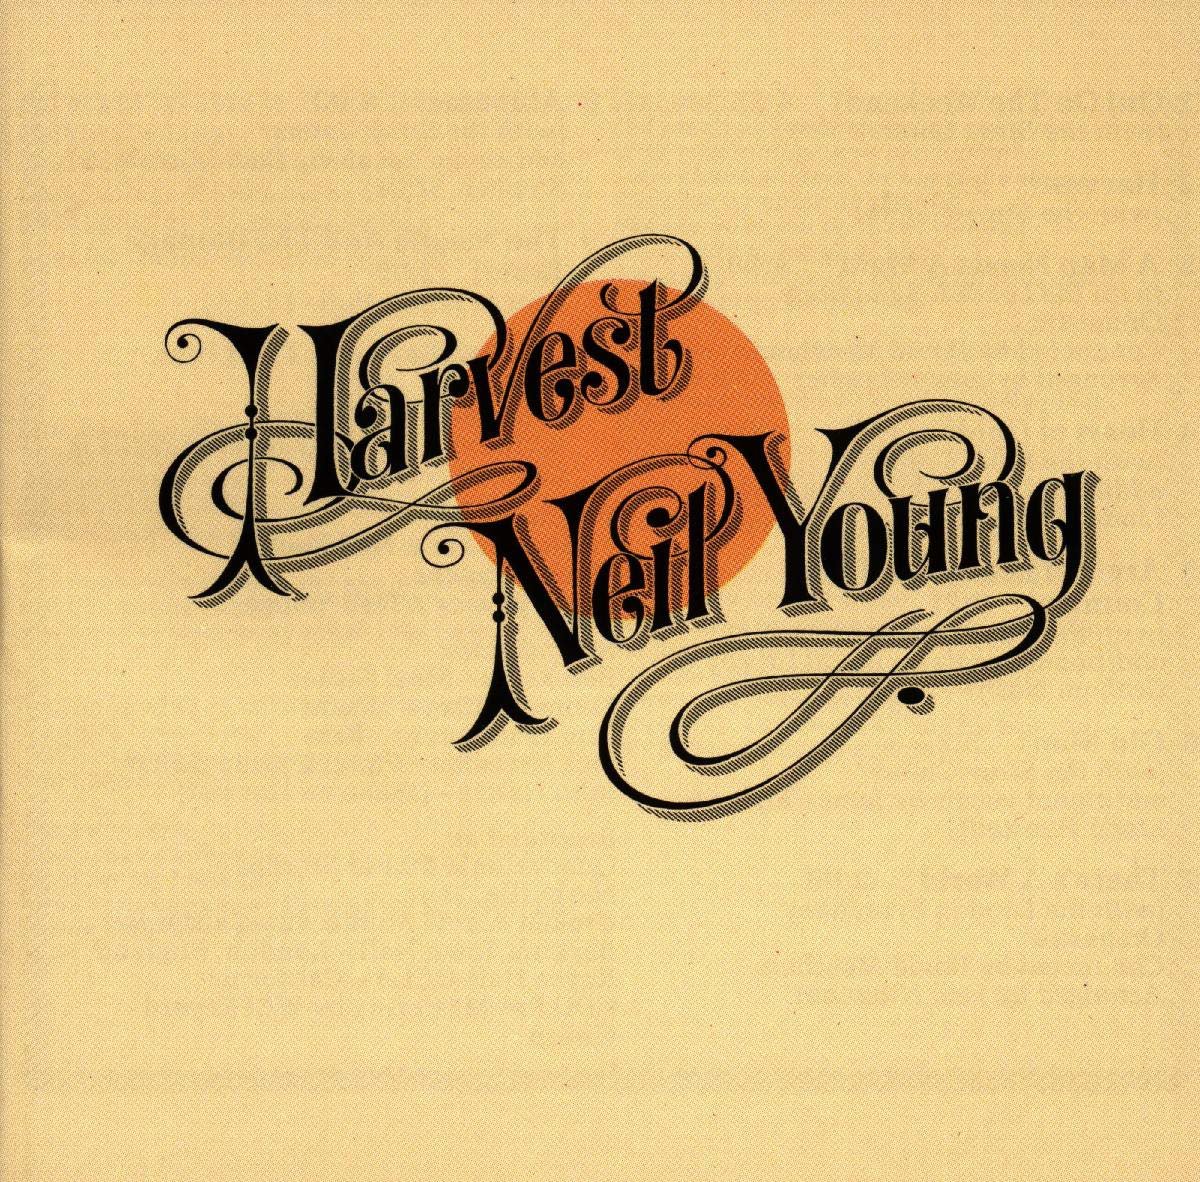 ‘Harvest’ – Neil Young